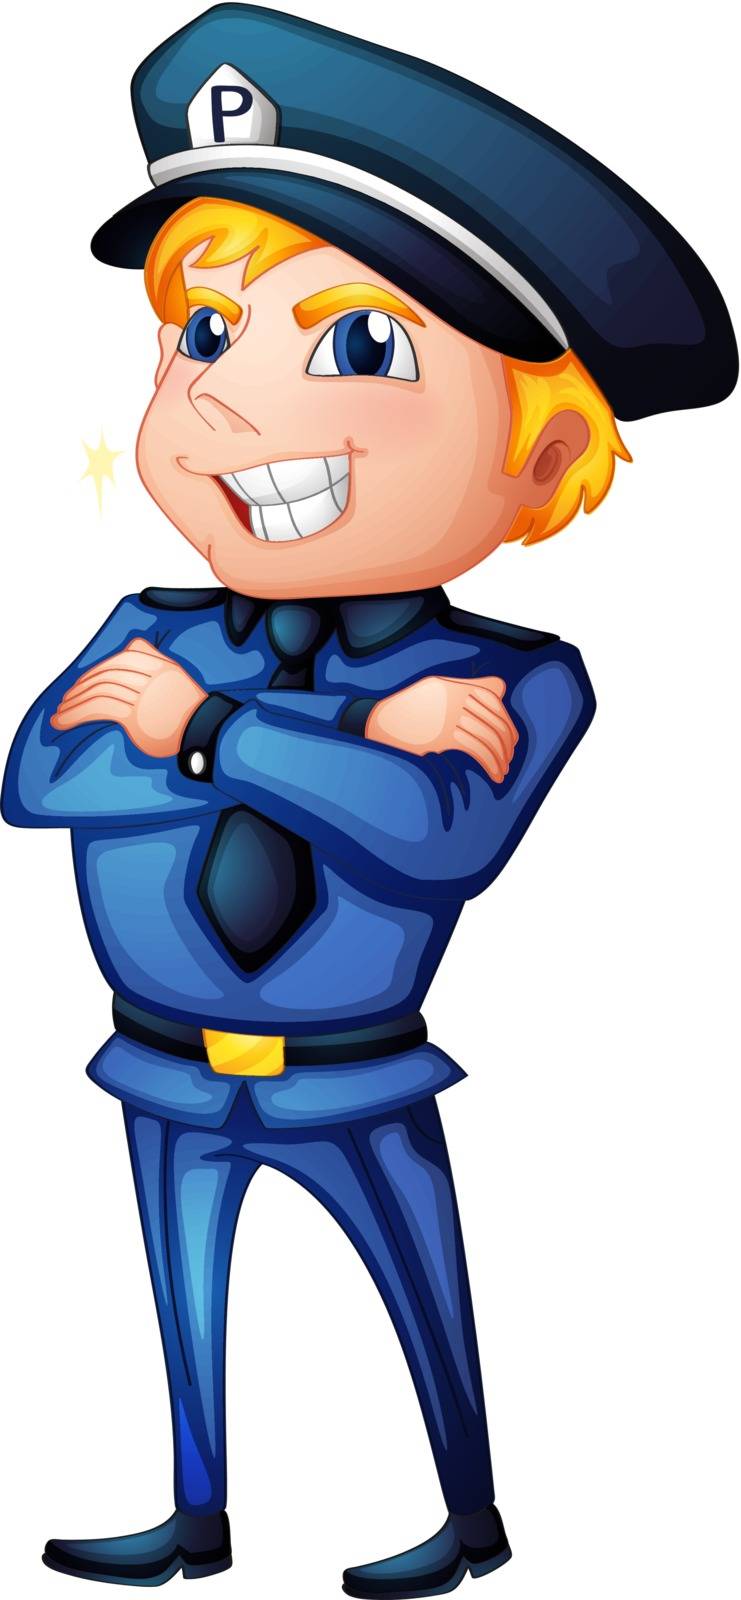 Illustration of a policeman with a complete uniform on a white background